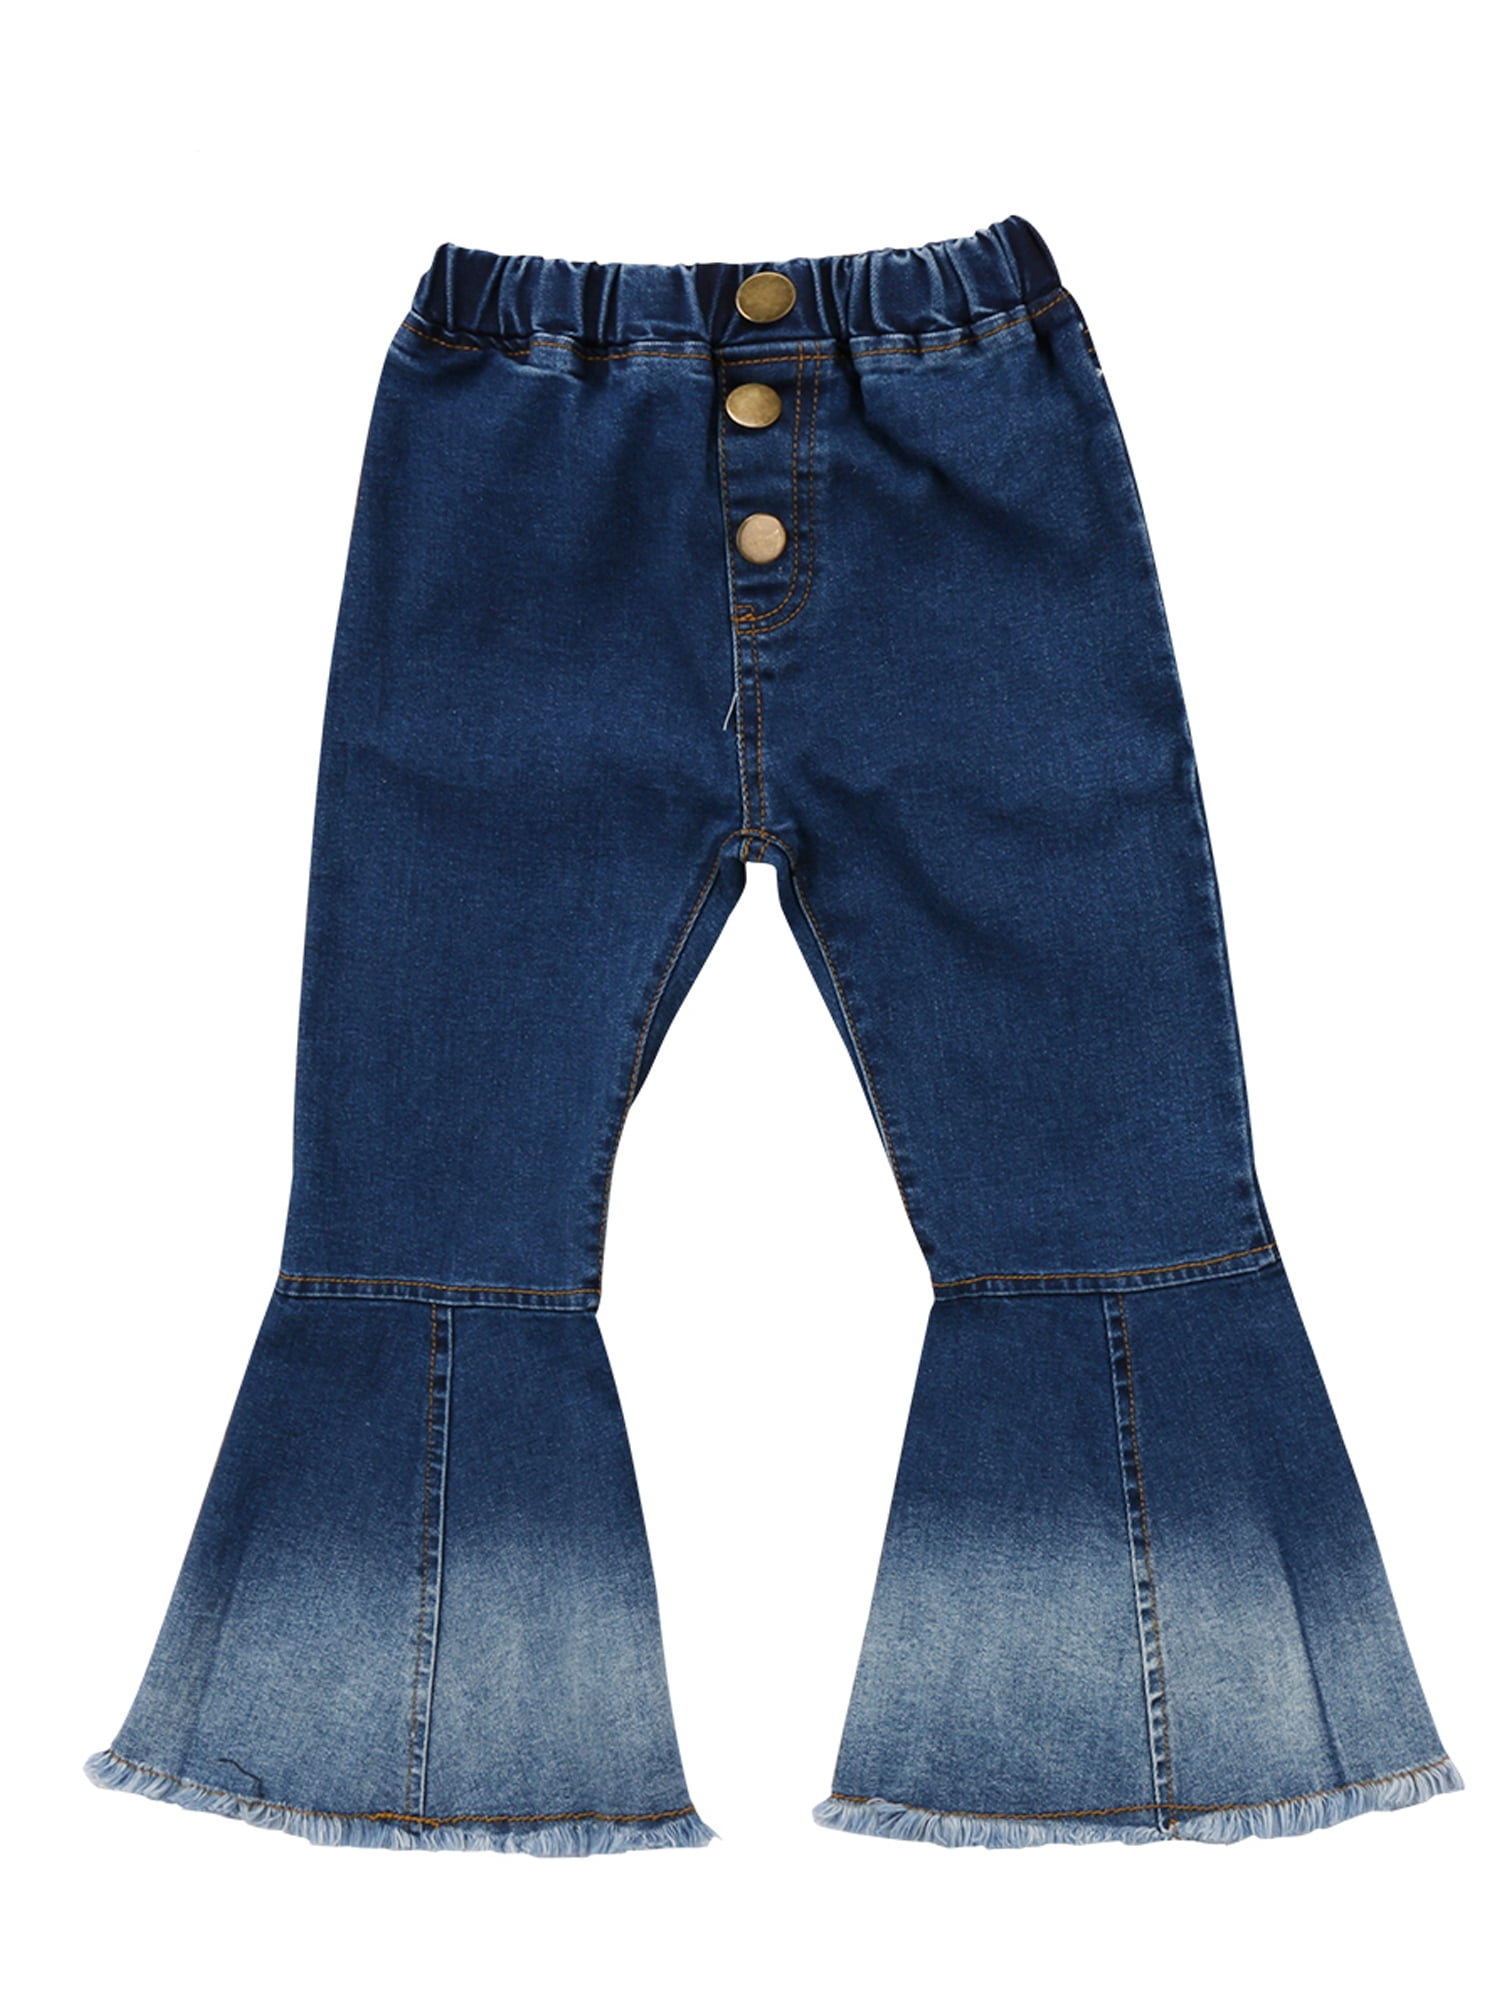 CHICTRY Girls Flared Jeans Casual Bell Bottom Denim Pants,Sizes 5